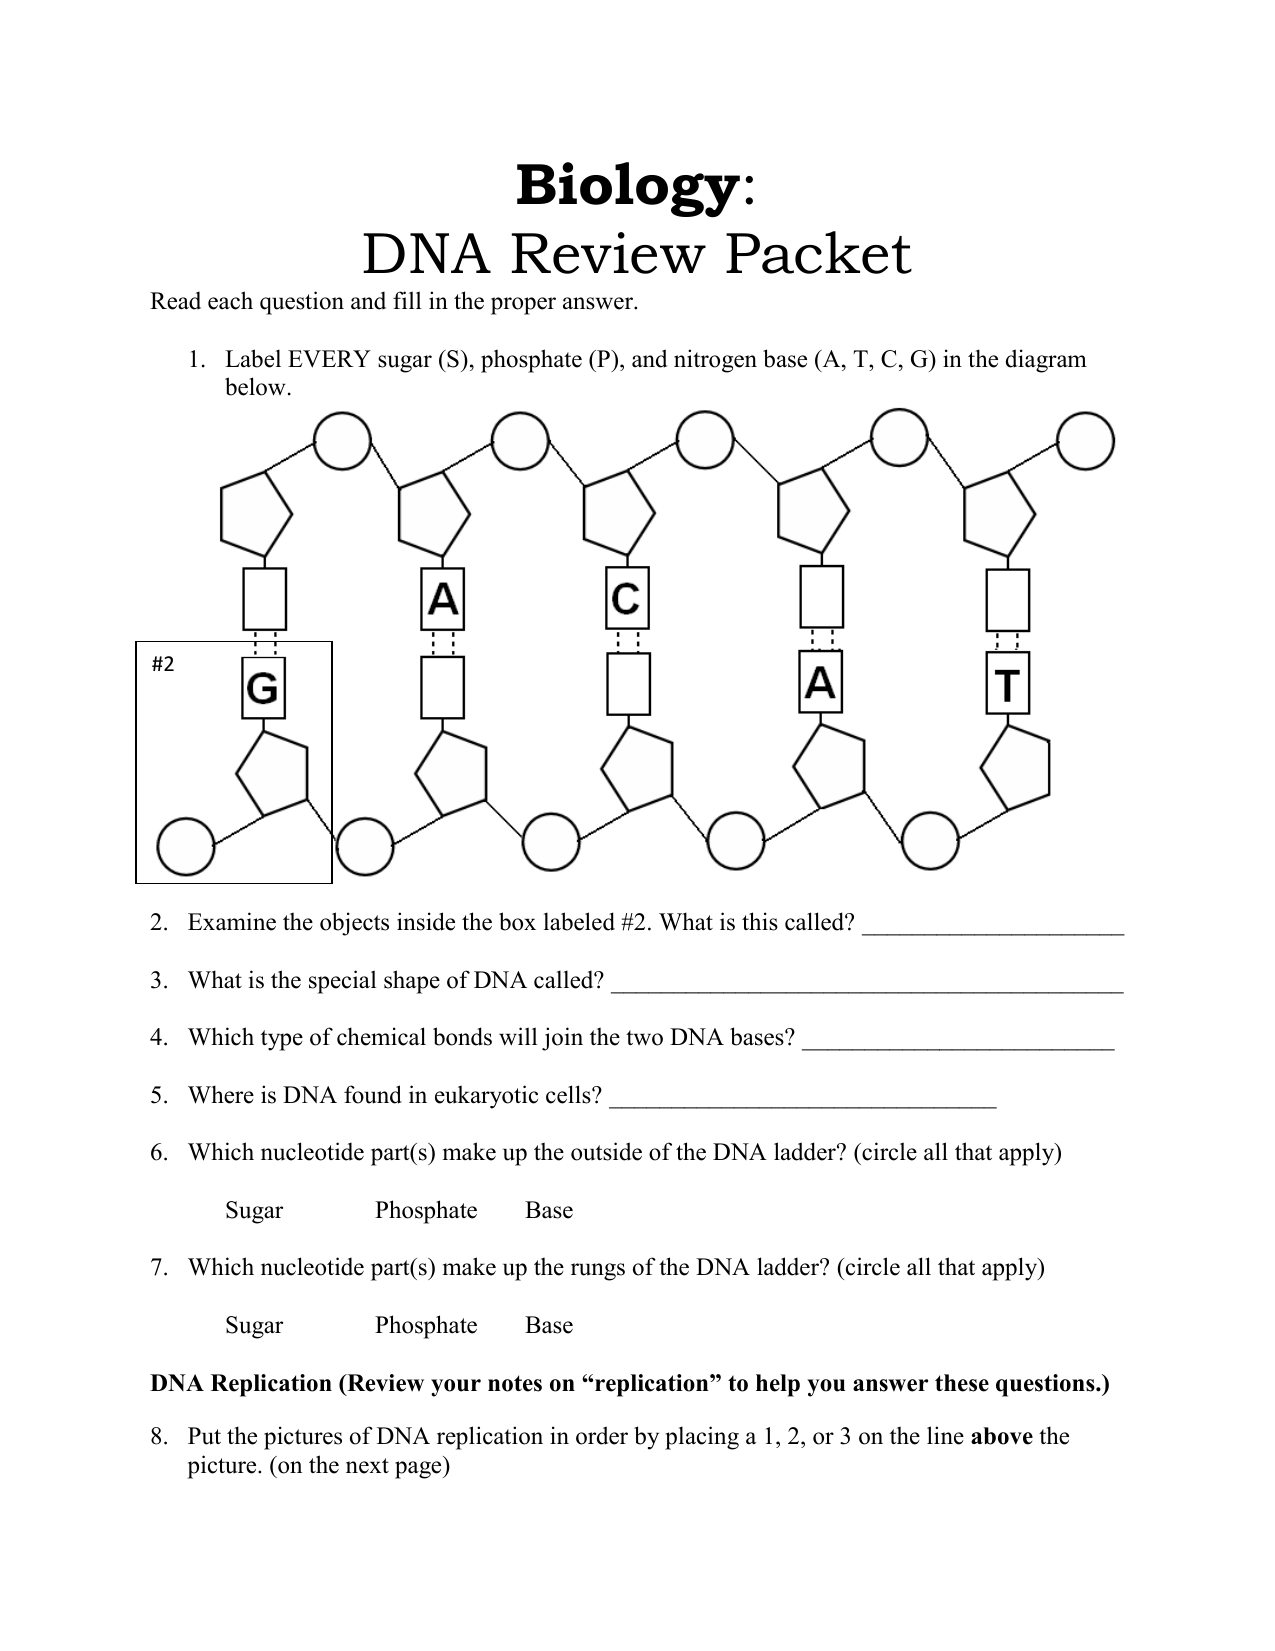 biology-dna-review-packet